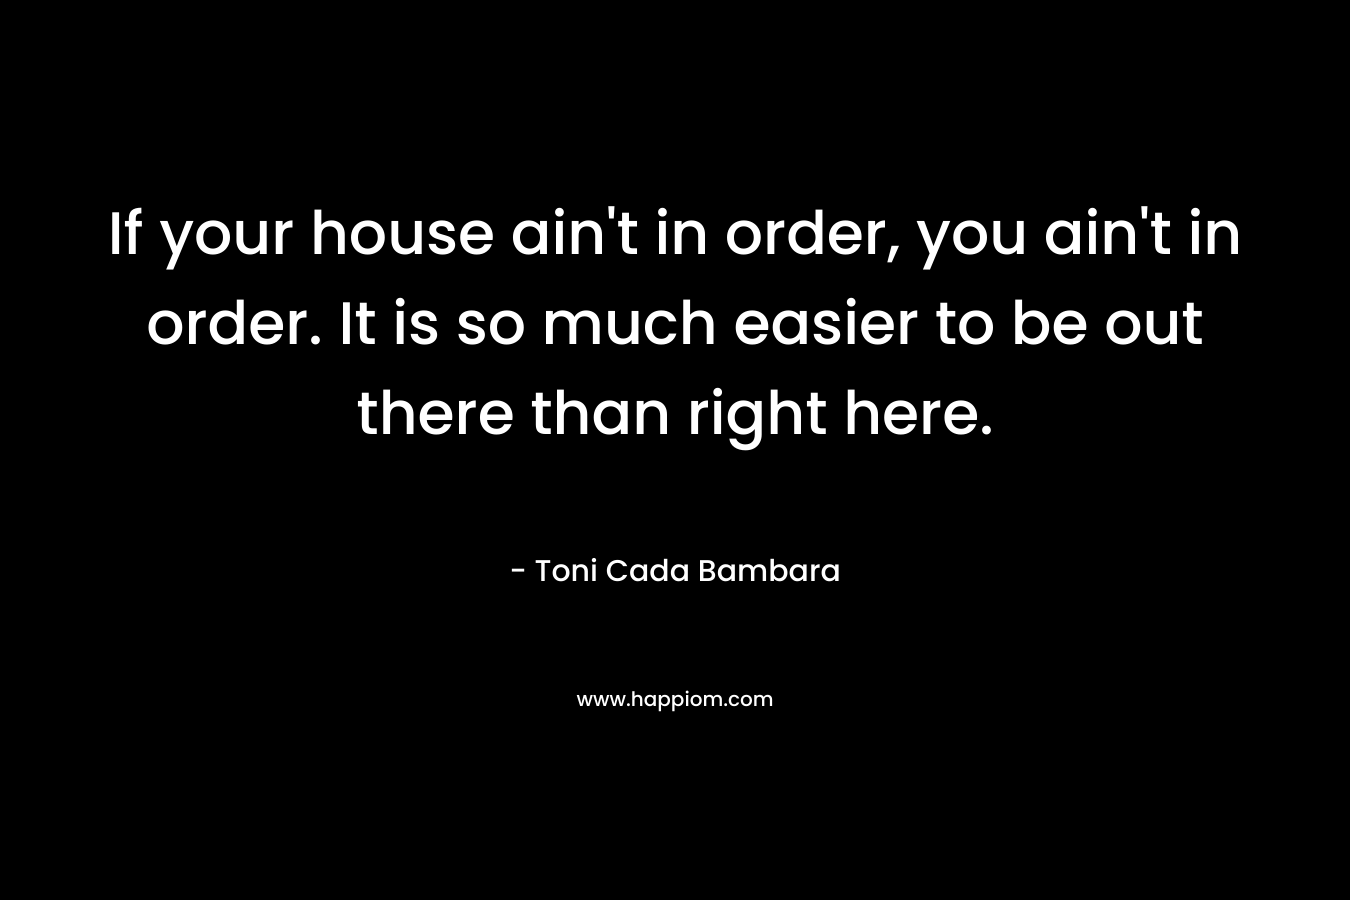 If your house ain't in order, you ain't in order. It is so much easier to be out there than right here.